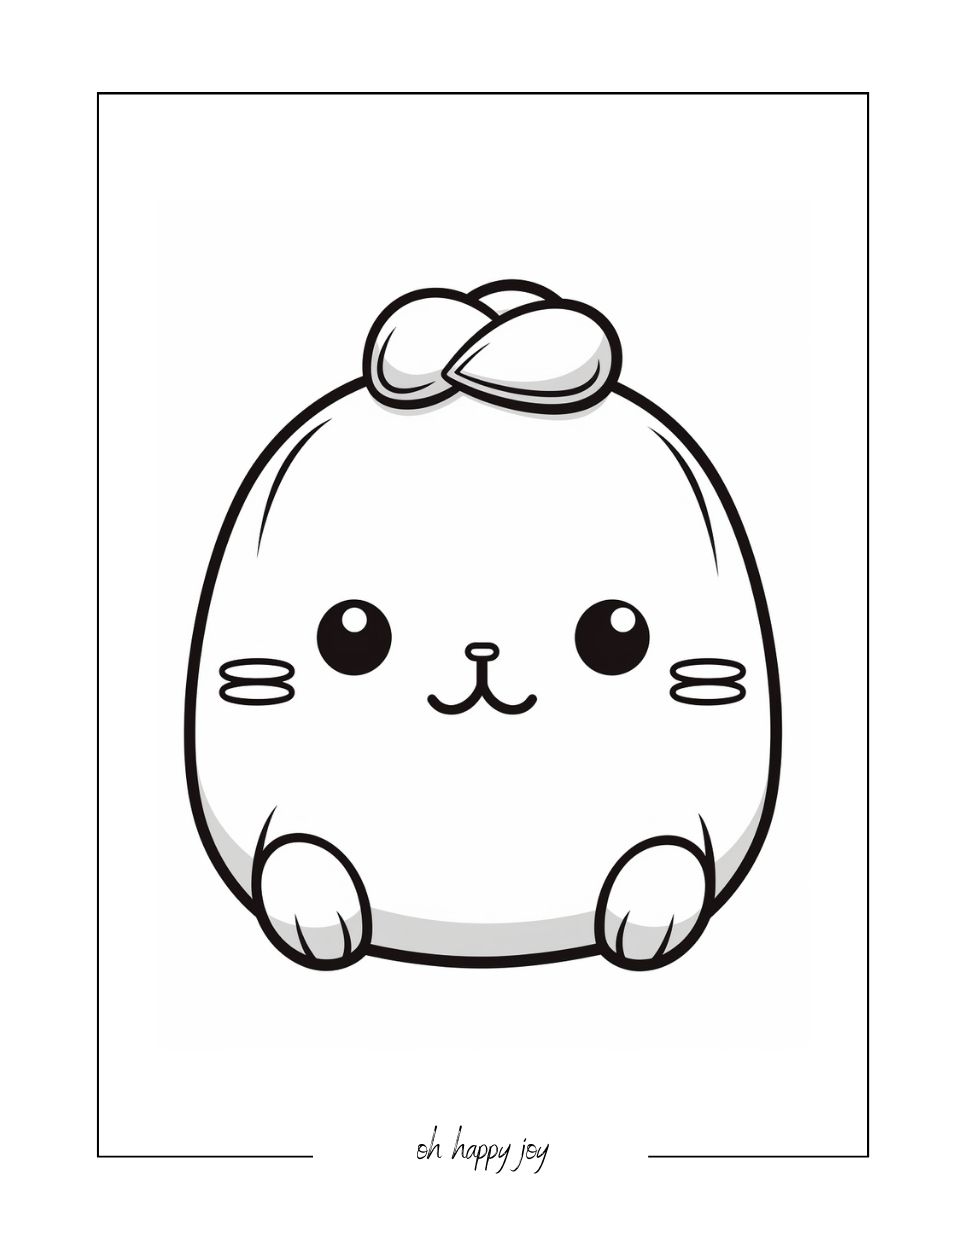 Squishmallow with buns coloring page